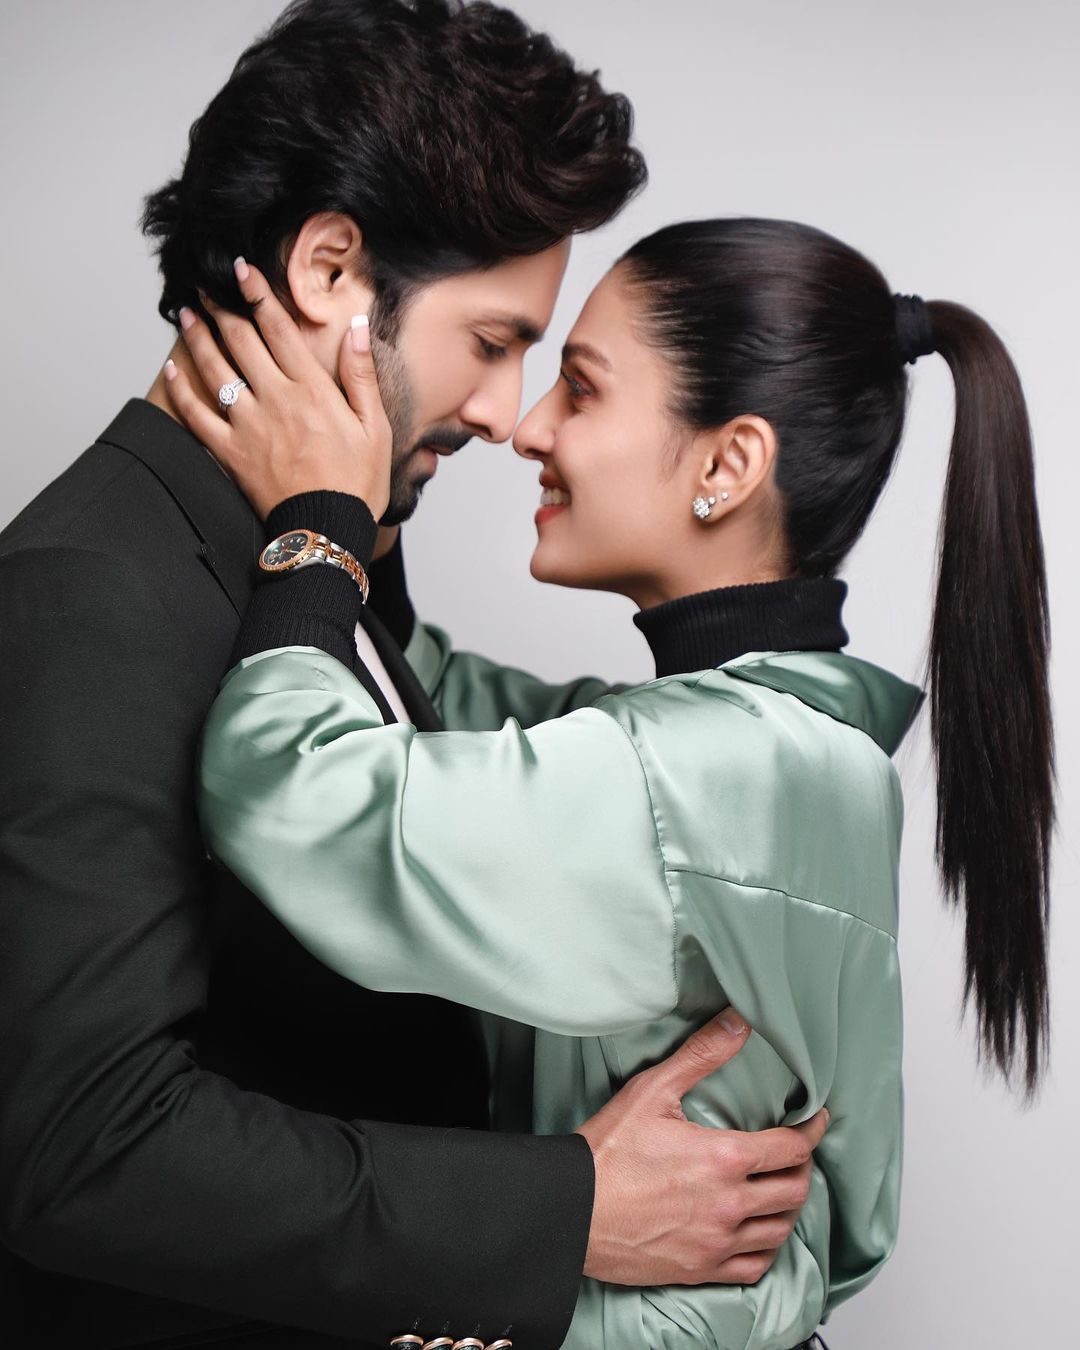 Ayeza and Danish Latest Photoshoot From 'Time Out With Ahsan Khan'